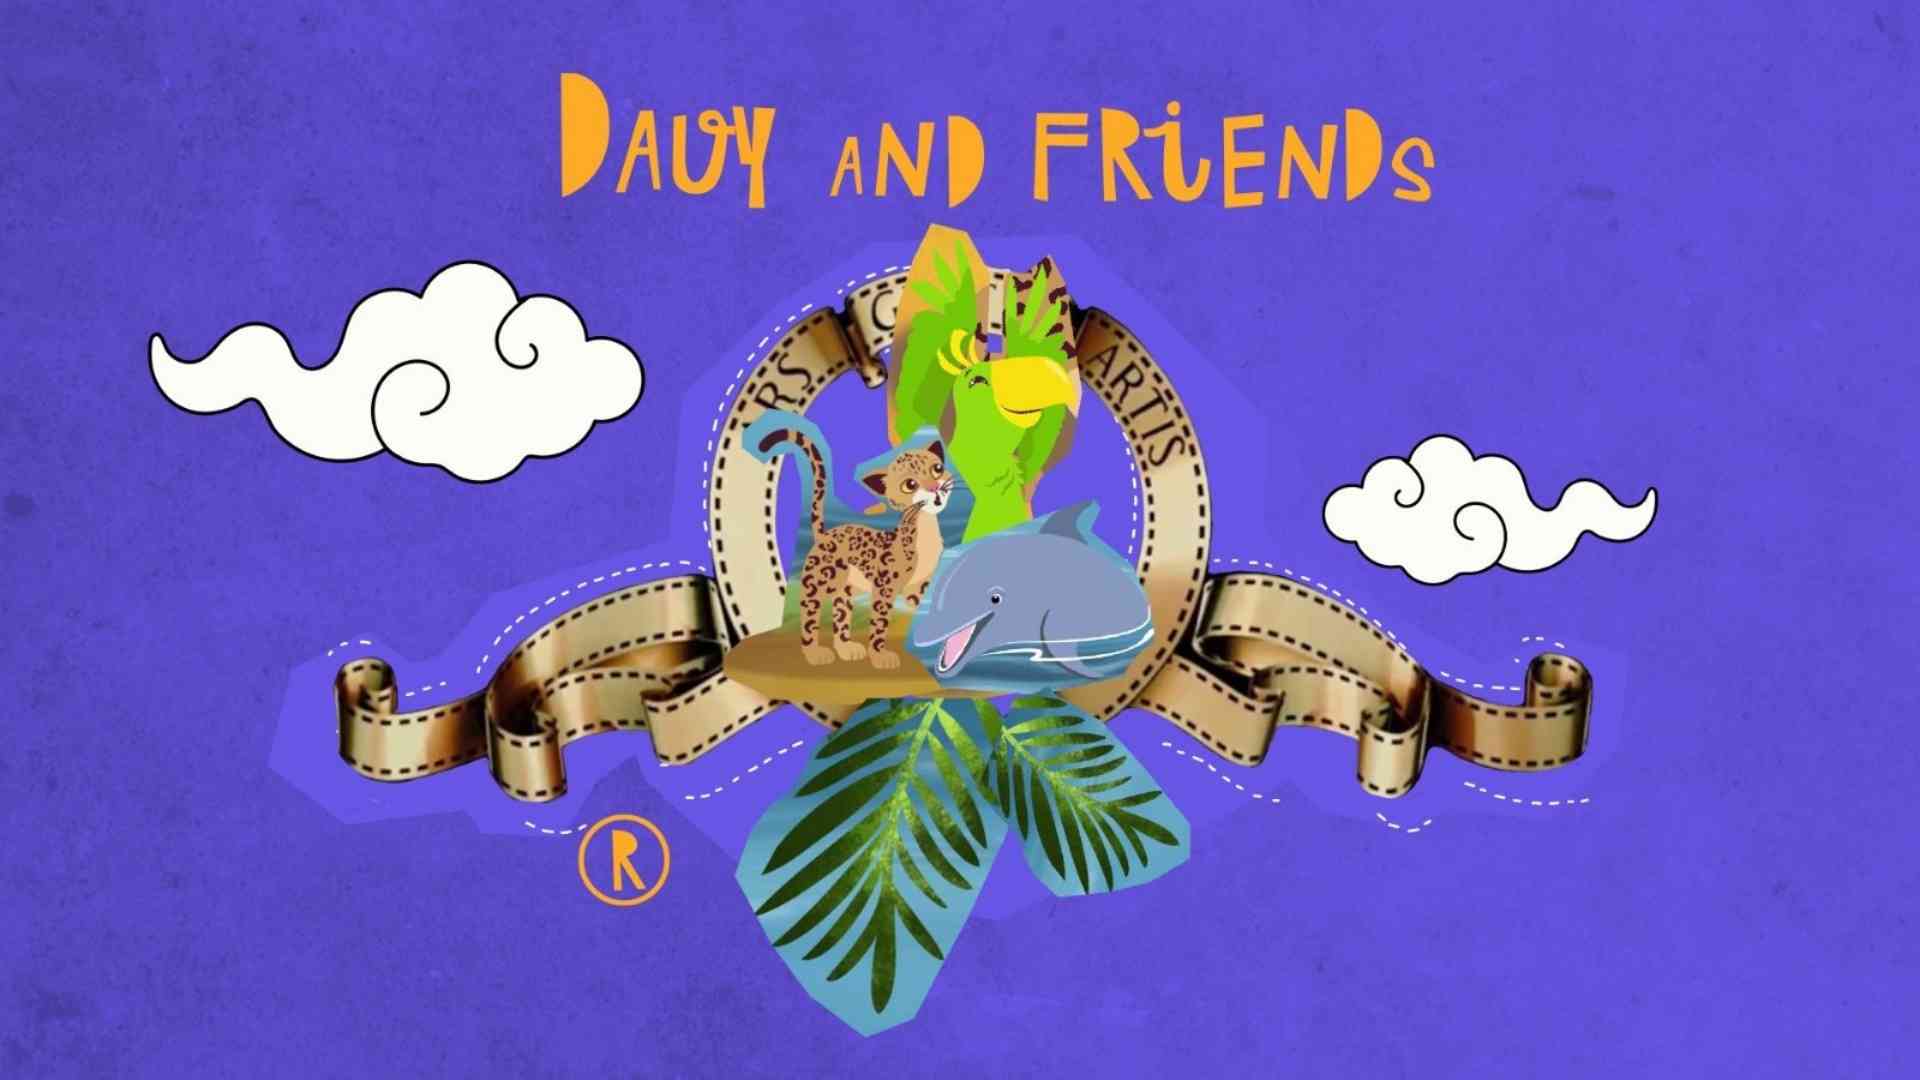 Davy & Friends - This is the trailer for the book